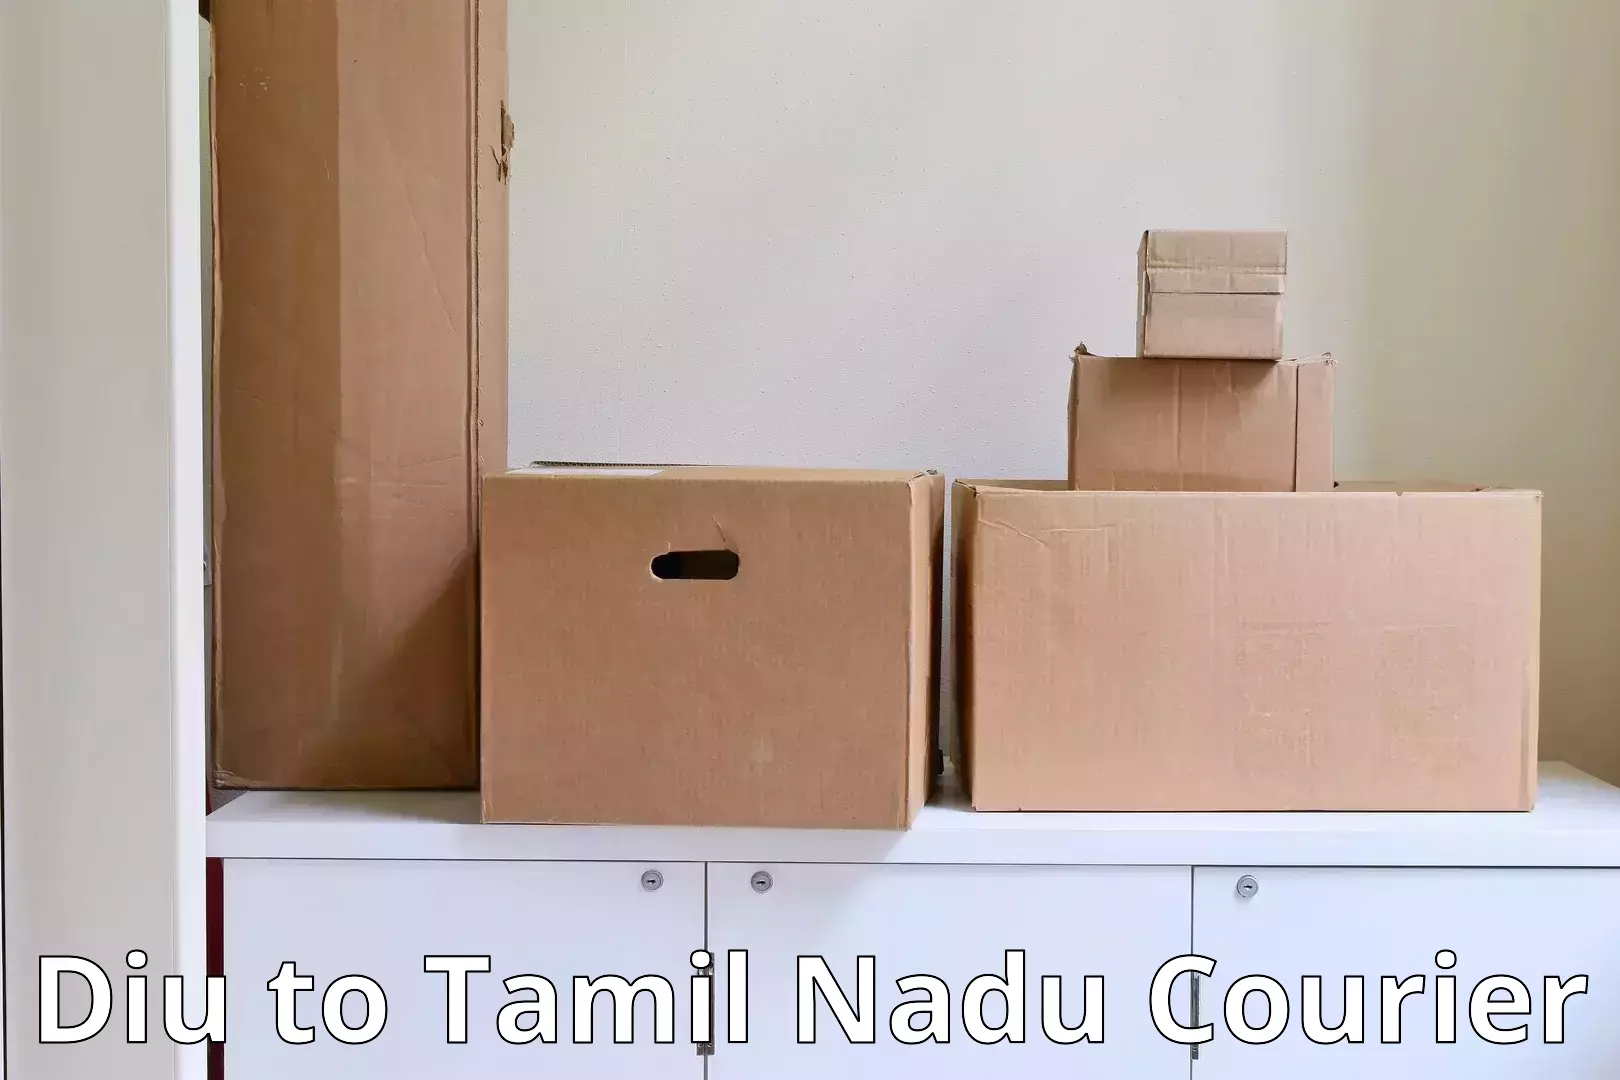 Moving and packing experts Diu to Tamil Nadu